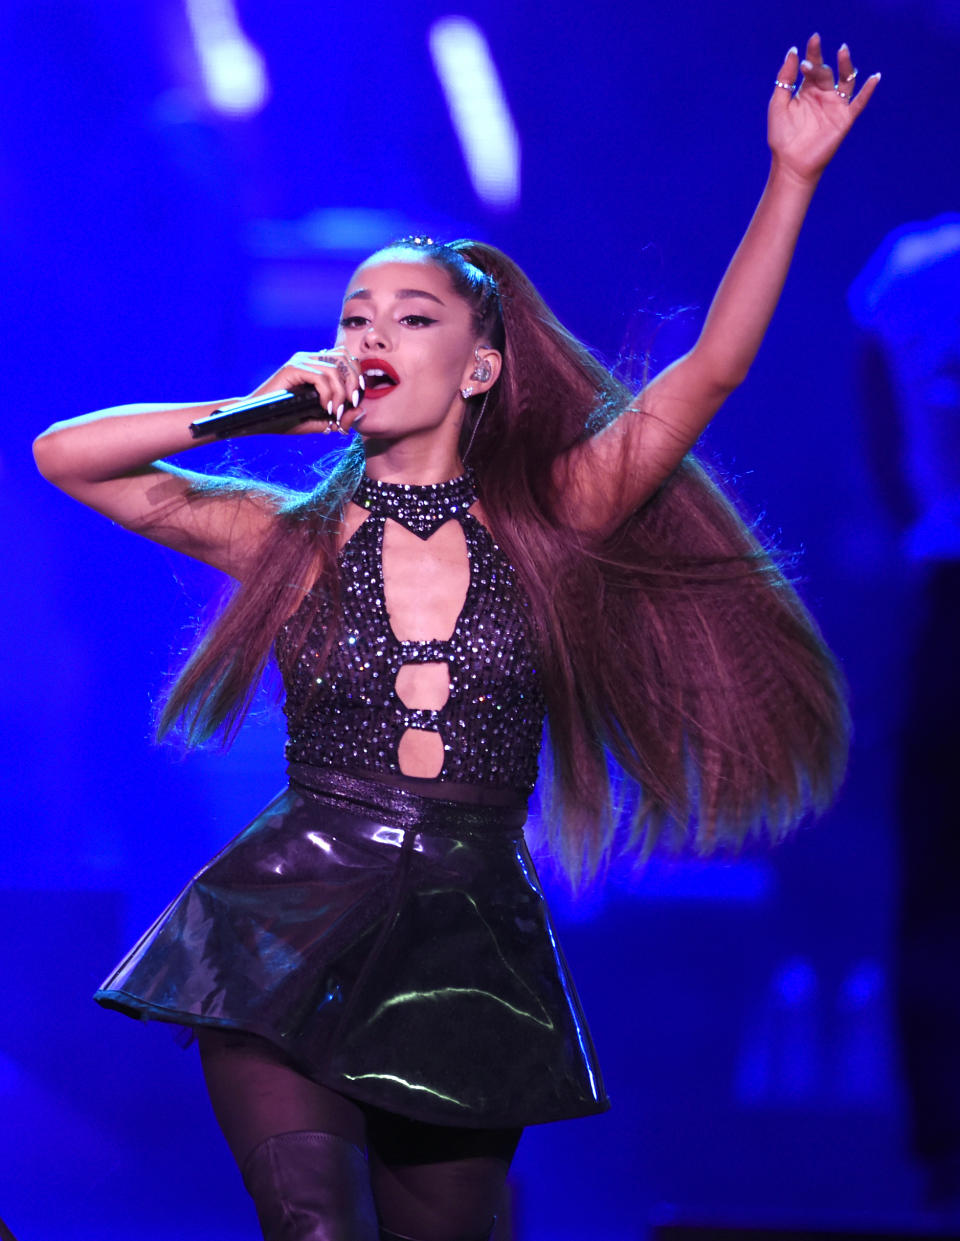 FILE - In this June 2, 2018 file photo, Ariana Grande performs at Wango Tango at Banc of California Stadium in Los Angeles. The Recording Academy’s Task Force on Diversity and Inclusion is a launching a new initiative announced Friday, Feb. 1, 2019, to create and expand more opportunities to female music producers and engineers. More than 200 musicians, labels and others have already pledged, including Lady Gaga, Justin Bieber, Pearl Jam, Pharrell and Grande. (Photo by Chris Pizzello/Invision/AP, File)